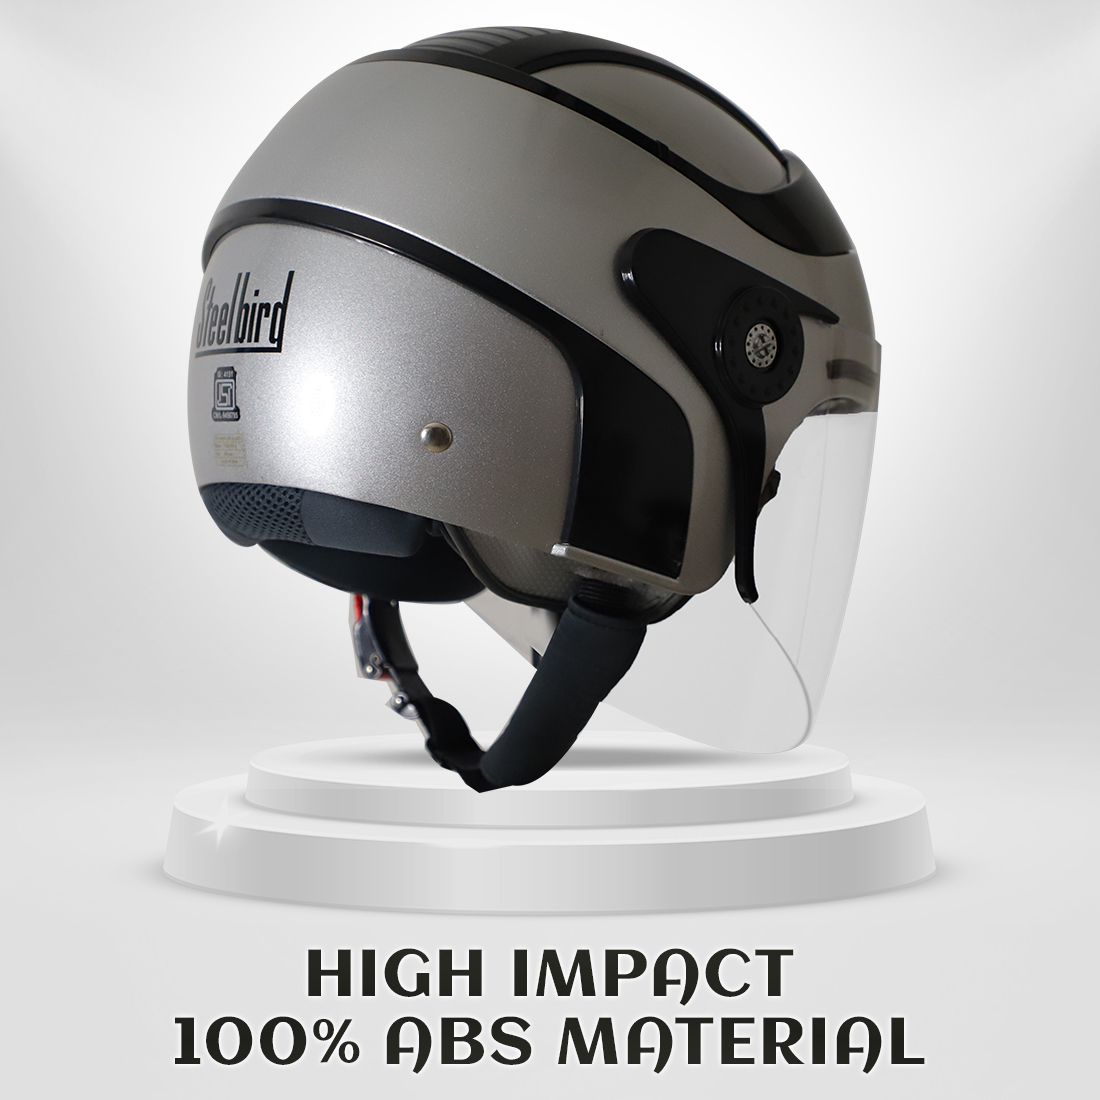 Steelbird SB-29 AER ISI Certified Helmet For Men And Women (Glossy Silver Black With Clear Visor)